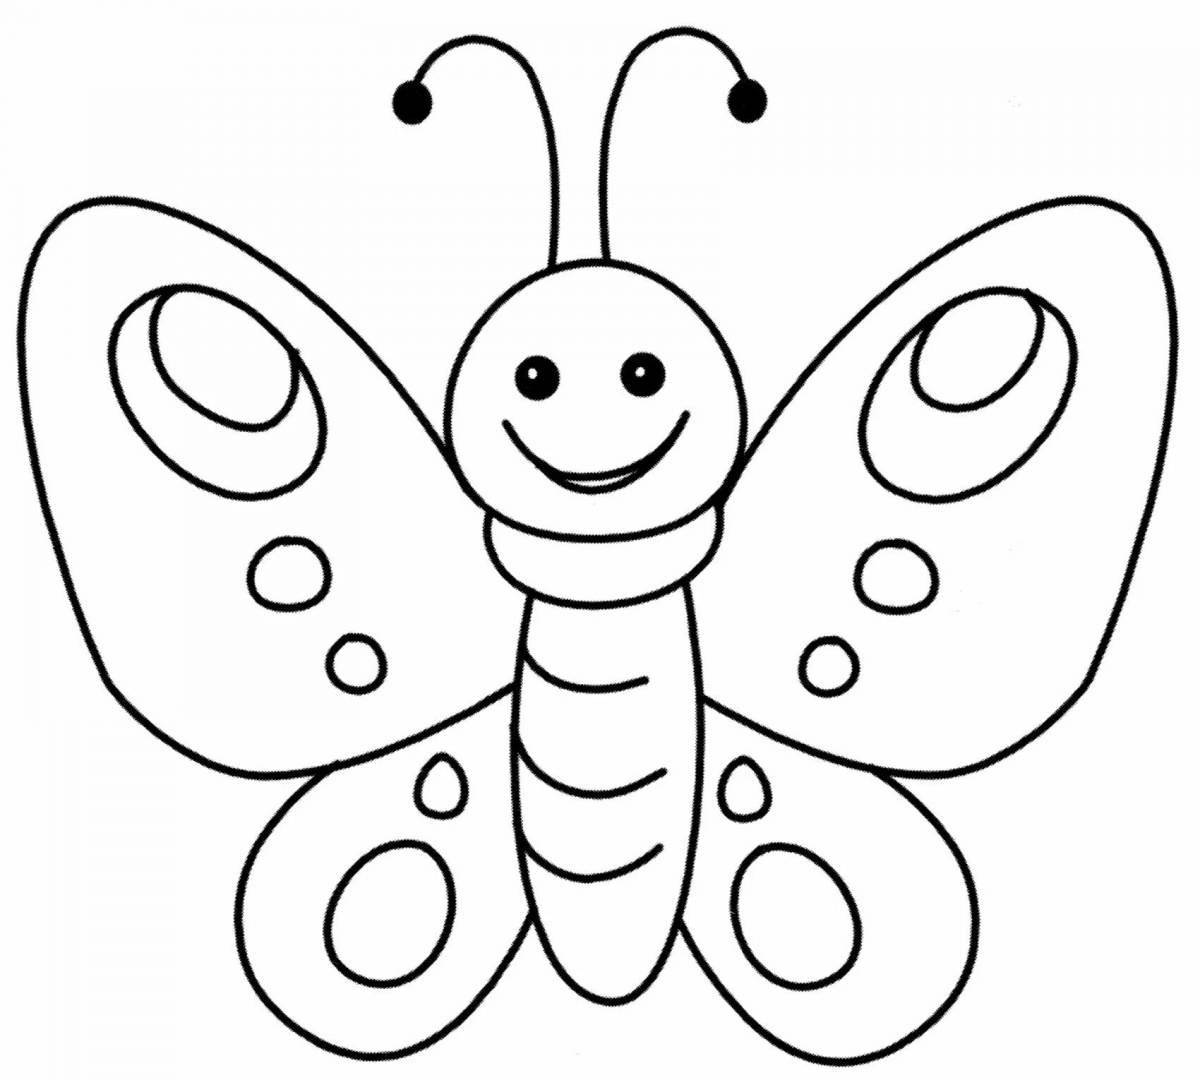 Delightful butterfly coloring book for kids 4-5 years old